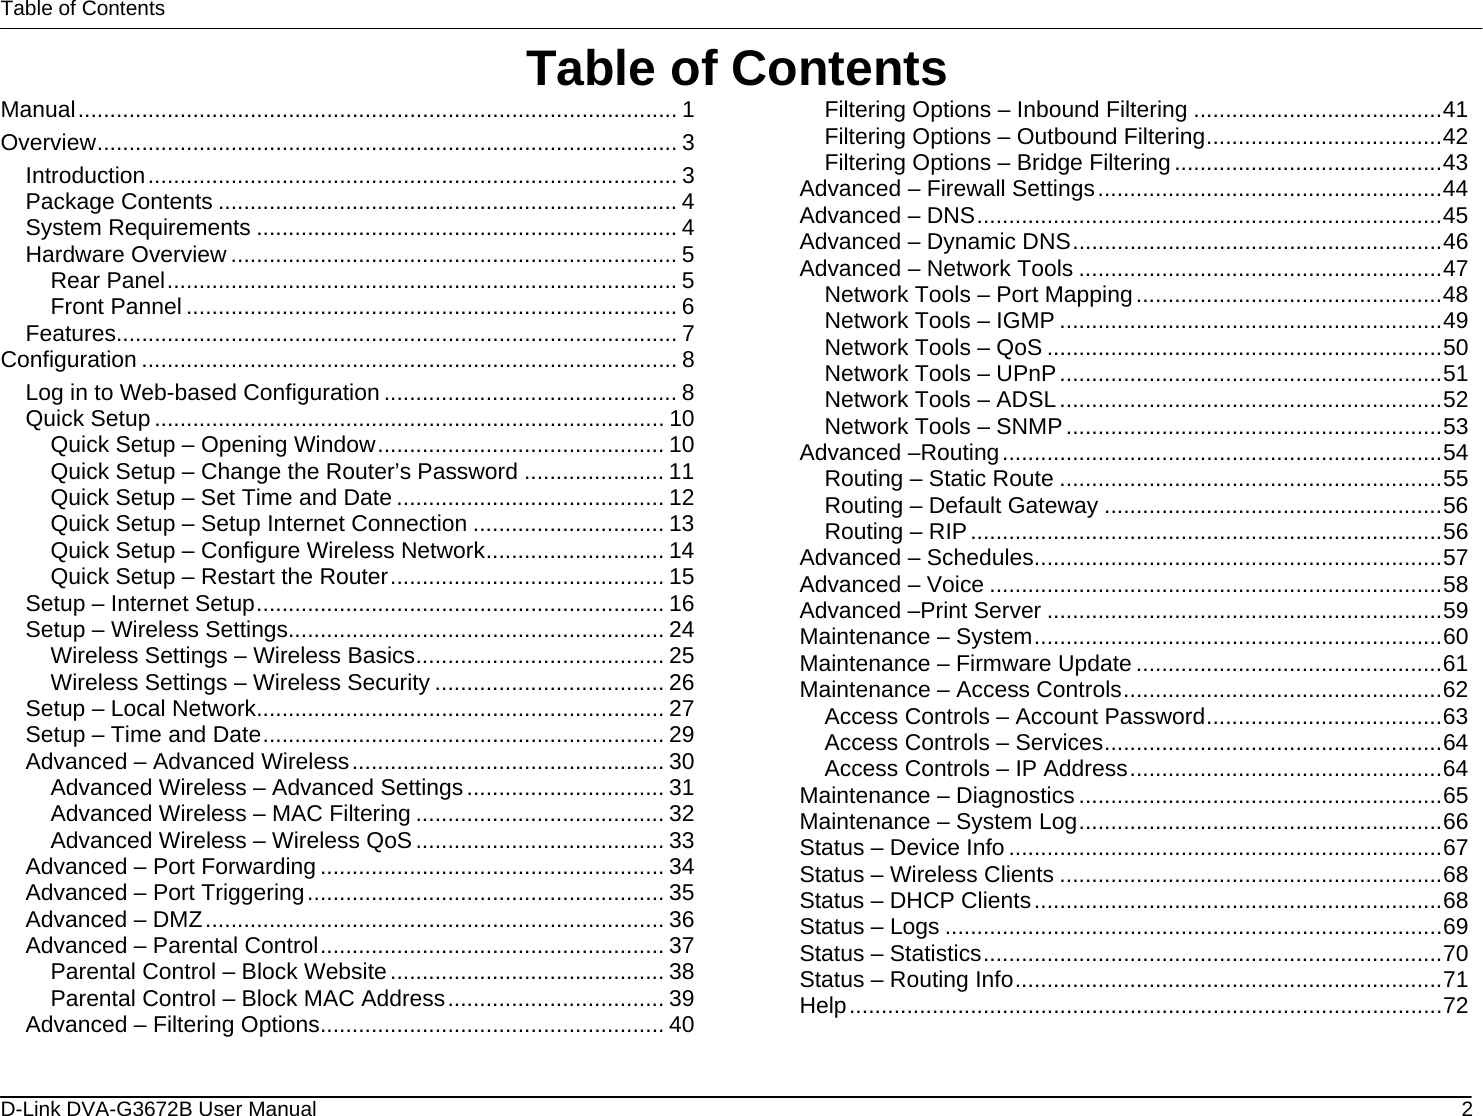 Table of Contents Table of Contents Manual.............................................................................................. 1 Overview........................................................................................... 3 Introduction................................................................................... 3 Package Contents ........................................................................ 4 System Requirements .................................................................. 4 Hardware Overview ...................................................................... 5 Rear Panel................................................................................ 5 Front Pannel ............................................................................. 6 Features........................................................................................ 7 Configuration .................................................................................... 8 Log in to Web-based Configuration .............................................. 8 Quick Setup ................................................................................ 10 Quick Setup – Opening Window............................................. 10 Quick Setup – Change the Router’s Password ...................... 11 Quick Setup – Set Time and Date .......................................... 12 Quick Setup – Setup Internet Connection .............................. 13 Quick Setup – Configure Wireless Network............................ 14 Quick Setup – Restart the Router........................................... 15 Setup – Internet Setup................................................................ 16 Setup – Wireless Settings........................................................... 24 Wireless Settings – Wireless Basics....................................... 25 Wireless Settings – Wireless Security .................................... 26 Setup – Local Network................................................................ 27 Setup – Time and Date............................................................... 29 Advanced – Advanced Wireless................................................. 30 Advanced Wireless – Advanced Settings............................... 31 Advanced Wireless – MAC Filtering ....................................... 32 Advanced Wireless – Wireless QoS....................................... 33 Advanced – Port Forwarding ...................................................... 34 Advanced – Port Triggering........................................................ 35 Advanced – DMZ........................................................................ 36 Advanced – Parental Control...................................................... 37 Parental Control – Block Website........................................... 38 Parental Control – Block MAC Address.................................. 39 Advanced – Filtering Options...................................................... 40 Filtering Options – Inbound Filtering .......................................41 Filtering Options – Outbound Filtering.....................................42 Filtering Options – Bridge Filtering..........................................43 Advanced – Firewall Settings......................................................44 Advanced – DNS.........................................................................45 Advanced – Dynamic DNS..........................................................46 Advanced – Network Tools .........................................................47 Network Tools – Port Mapping................................................48 Network Tools – IGMP ............................................................49 Network Tools – QoS ..............................................................50 Network Tools – UPnP............................................................51 Network Tools – ADSL............................................................52 Network Tools – SNMP...........................................................53 Advanced –Routing.....................................................................54 Routing – Static Route ............................................................55 Routing – Default Gateway .....................................................56 Routing – RIP..........................................................................56 Advanced – Schedules................................................................57 Advanced – Voice .......................................................................58 Advanced –Print Server ..............................................................59 Maintenance – System................................................................60 Maintenance – Firmware Update ................................................61 Maintenance – Access Controls..................................................62 Access Controls – Account Password.....................................63 Access Controls – Services.....................................................64 Access Controls – IP Address.................................................64 Maintenance – Diagnostics .........................................................65 Maintenance – System Log.........................................................66 Status – Device Info ....................................................................67 Status – Wireless Clients ............................................................68 Status – DHCP Clients................................................................68 Status – Logs ..............................................................................69 Status – Statistics........................................................................70 Status – Routing Info...................................................................71 Help.............................................................................................72  D-Link DVA-G3672B User Manual  2